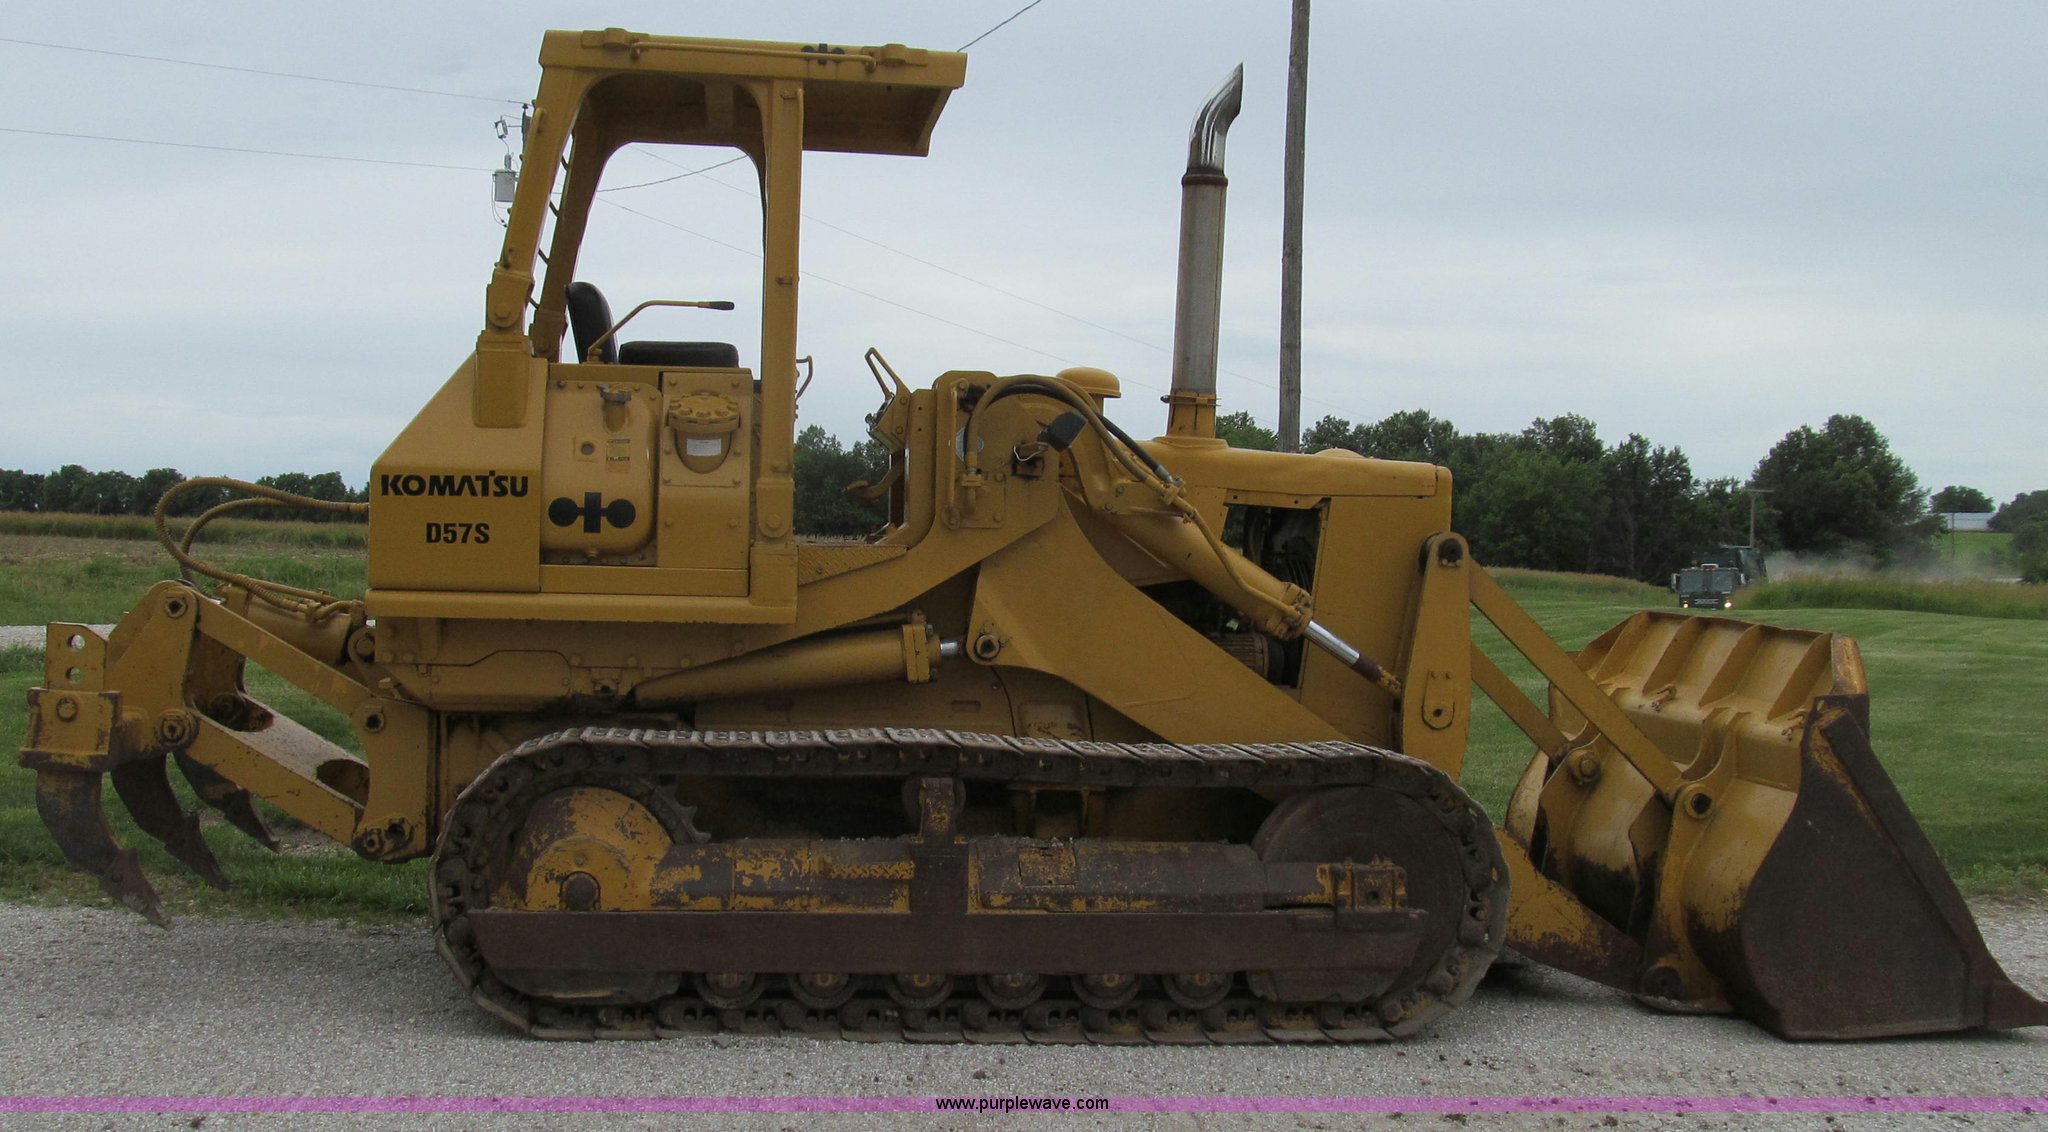 Komatsu D57s Track Loader w/ Rippers and 4-in-1 Bucket